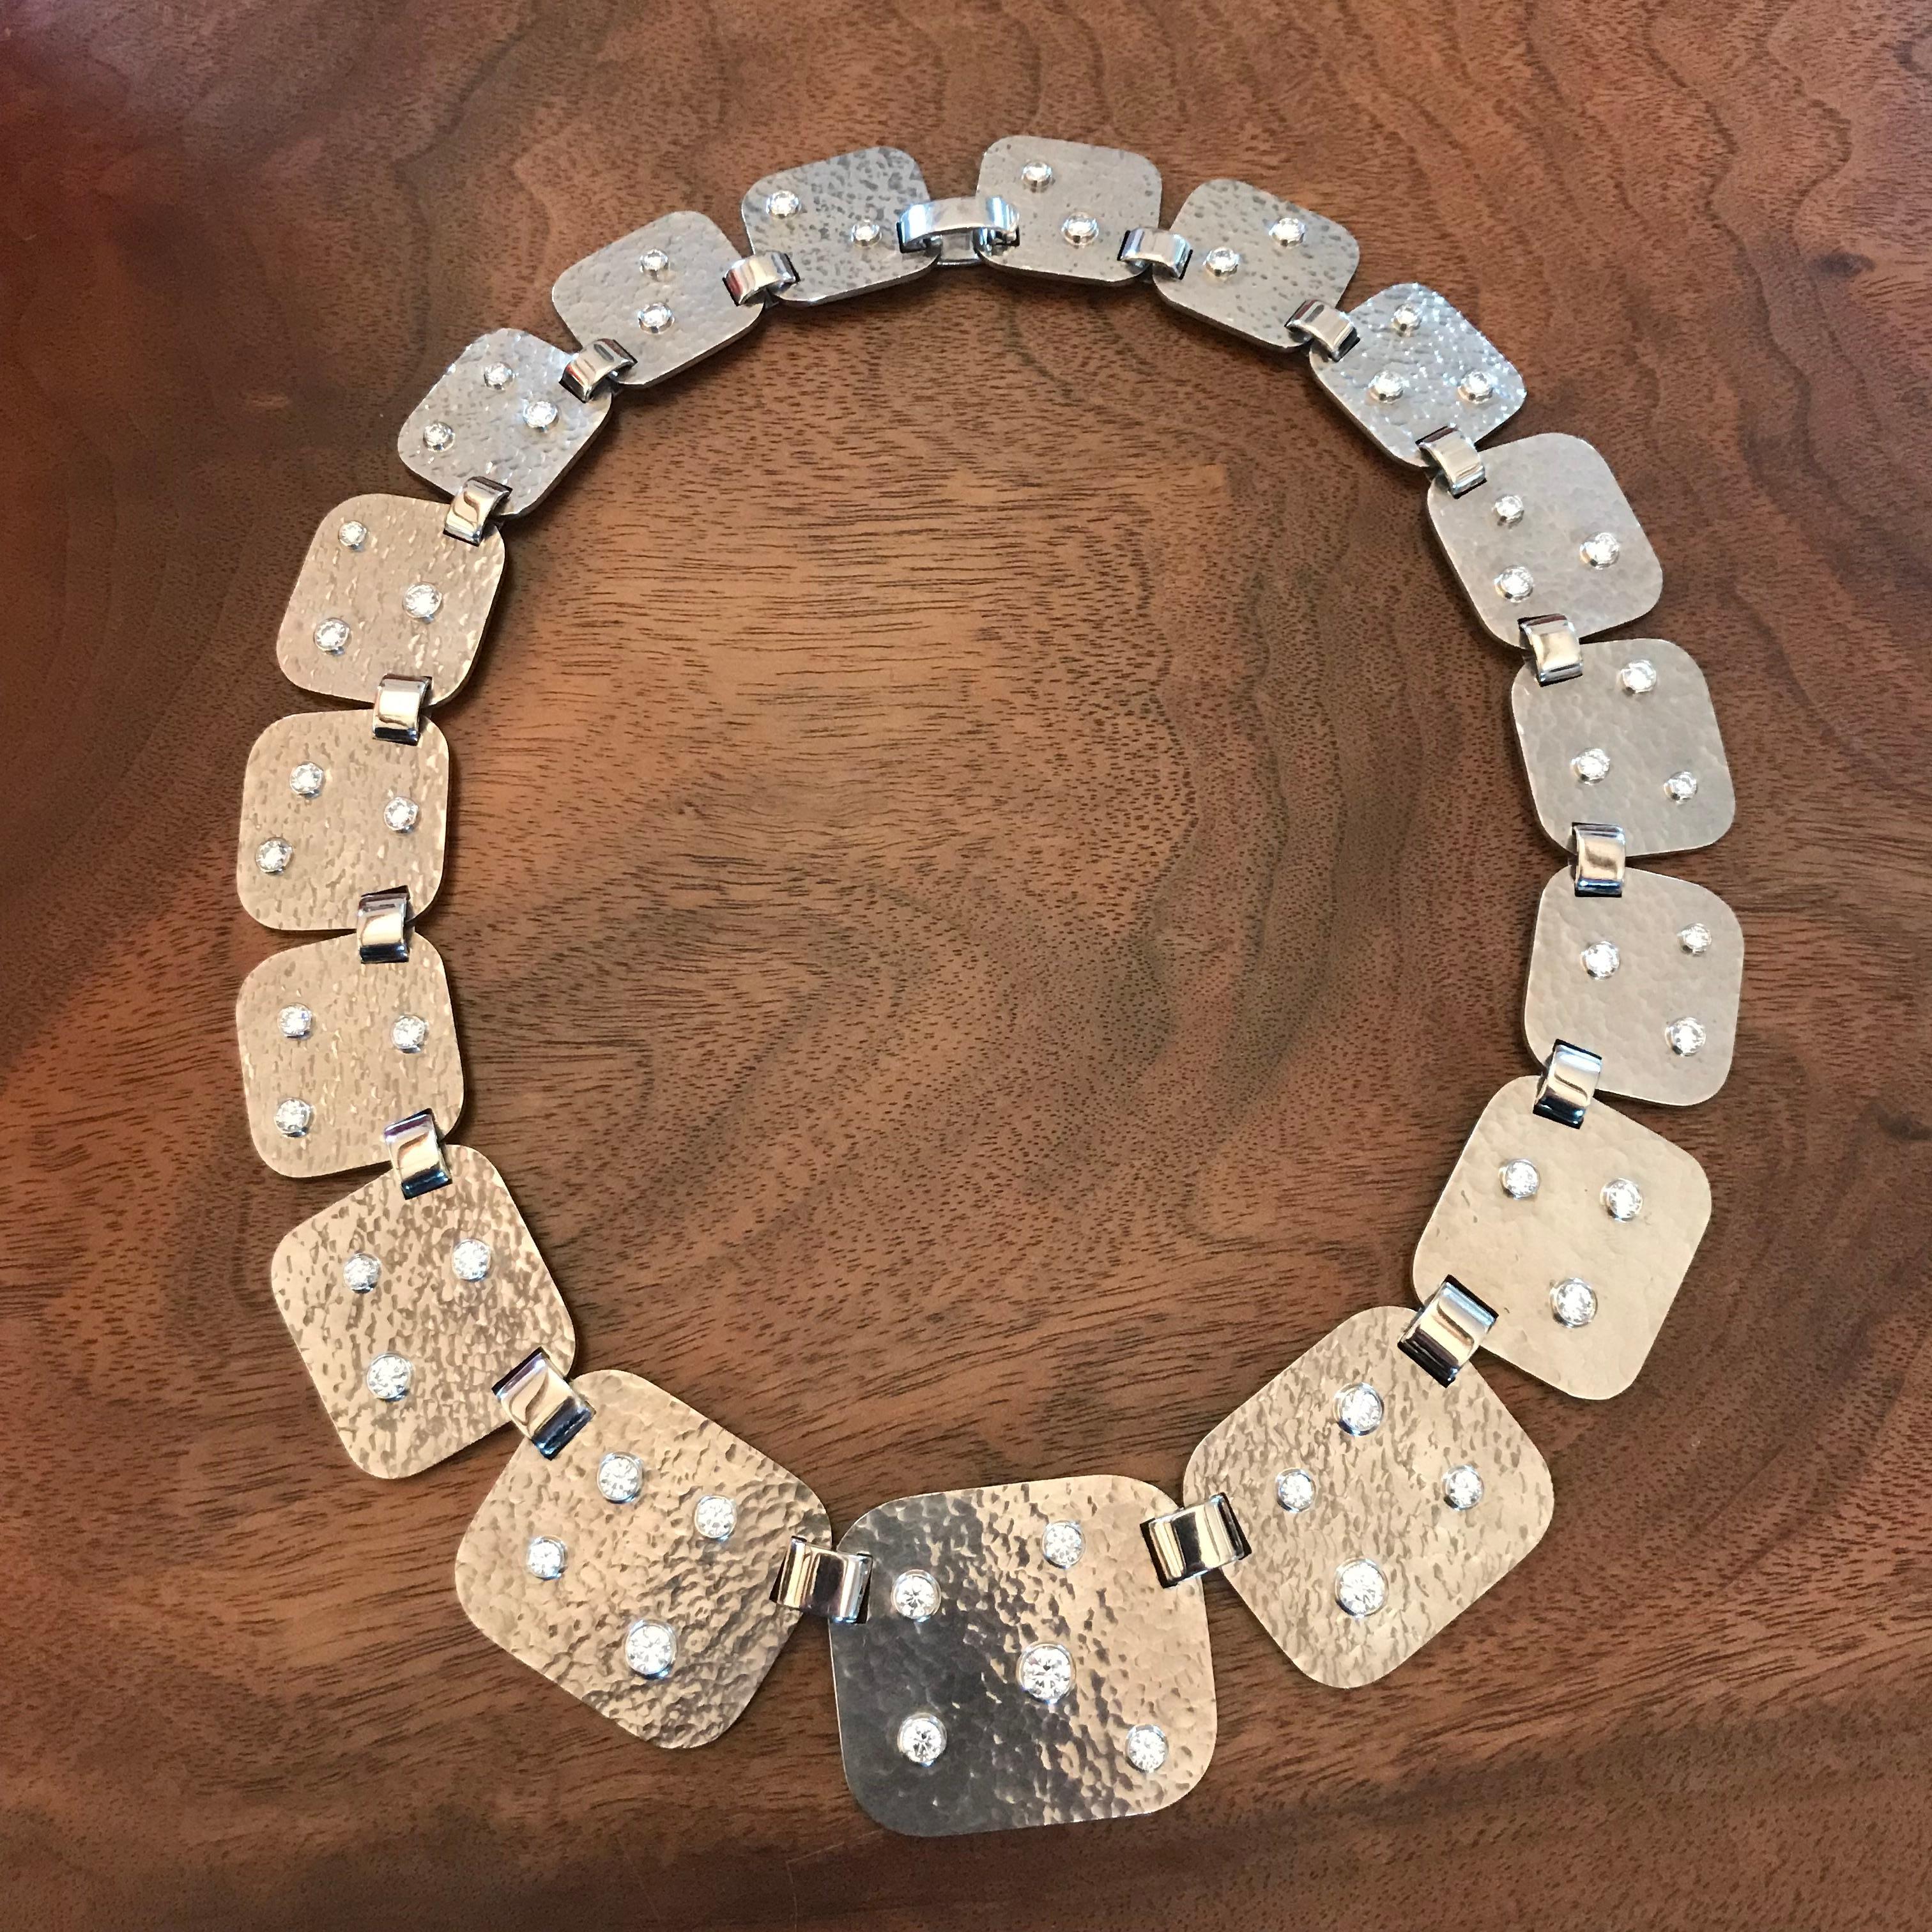 An extraordinary high-class hammered white gold necklace with 51 brilliant-cut diamonds 8,87 ct TW/SI. The size of each segment varies between 23 - 39 mm.
This 46 mm long necklace is a unique jewel designed by Colleen B. Rosenblat.
